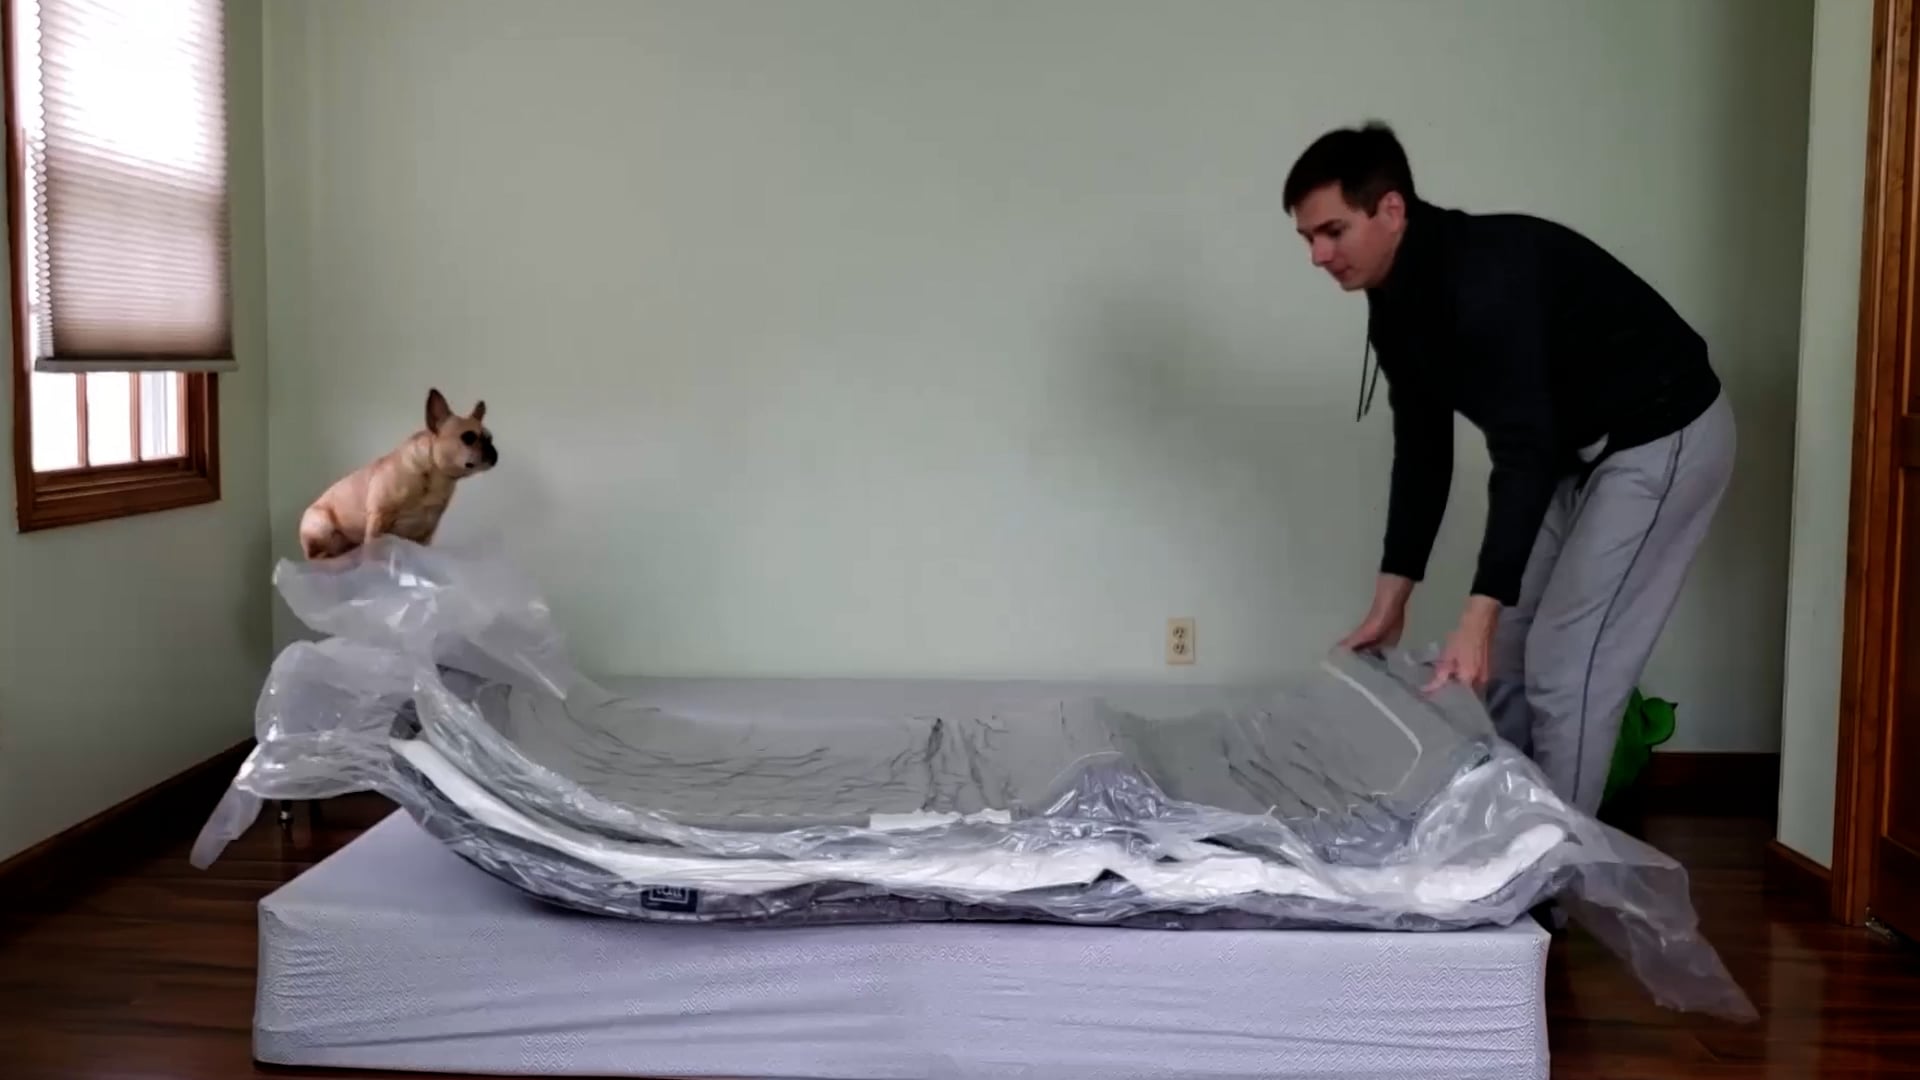 A dog and man with a lull mattress expanding.